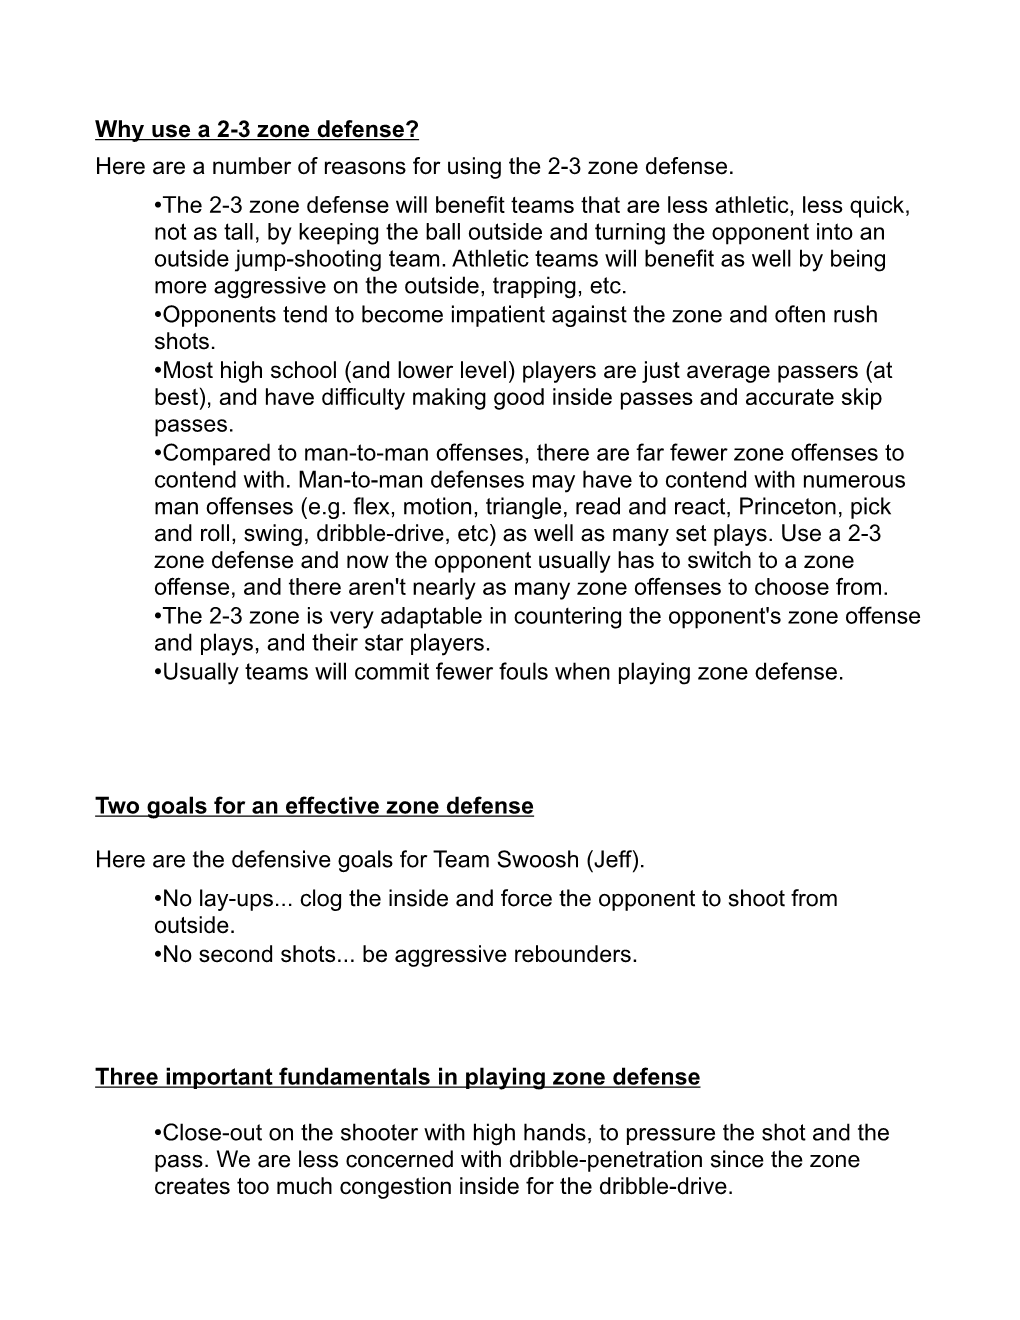 Why Use a 2-3 Zone Defense? Here Are a Number of Reasons for Using the 2-3 Zone Defense